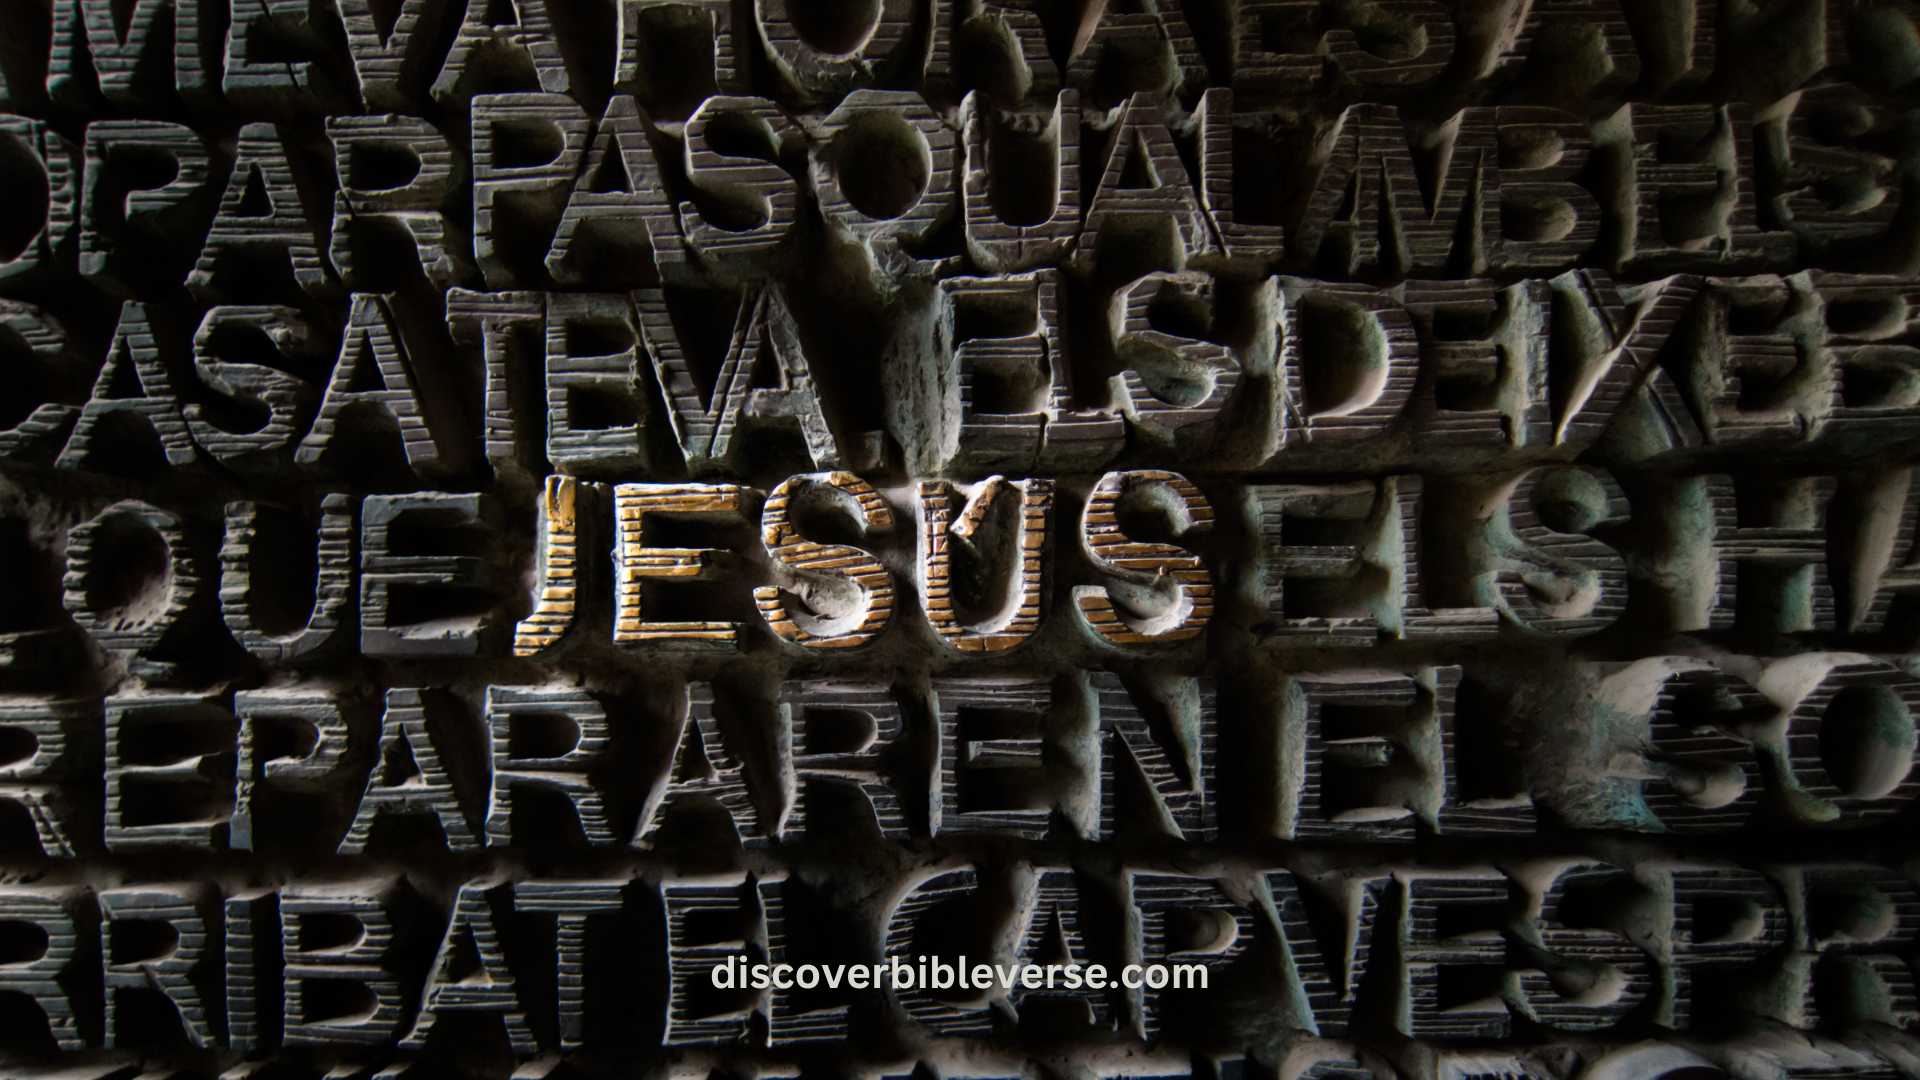 How Many Times is Jesus Mentioned in the Bible?